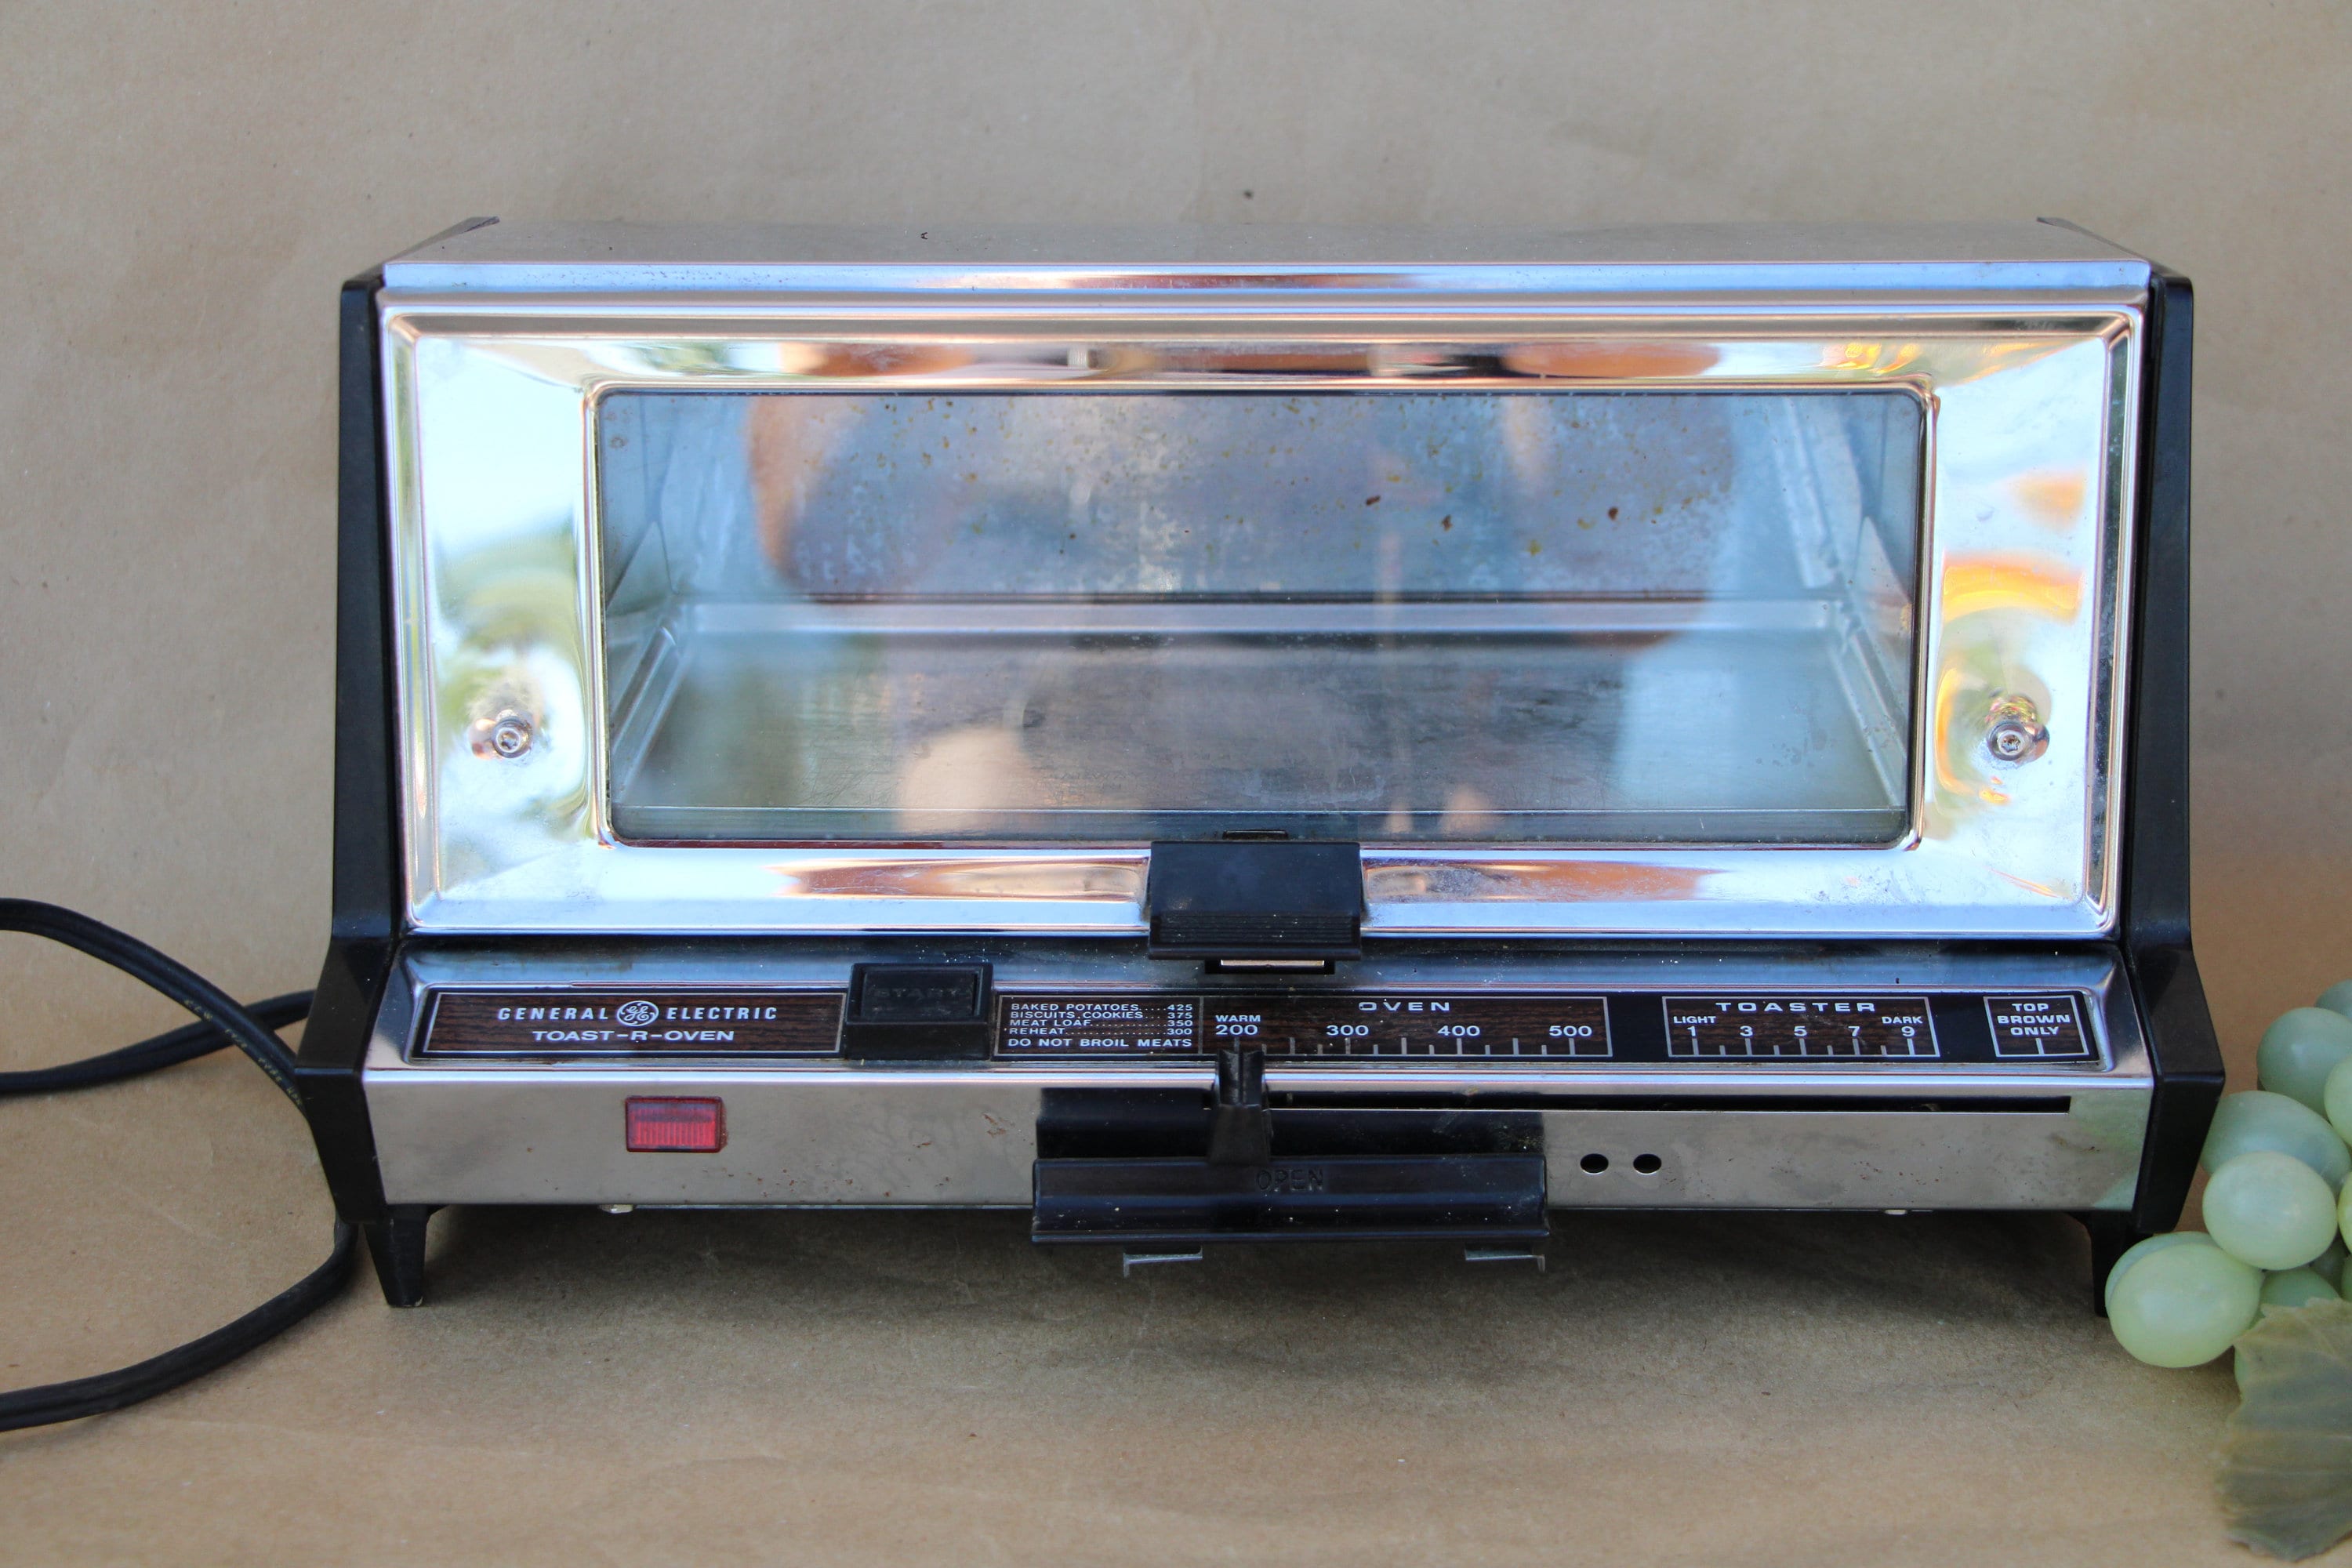 VINTAGE 1966 GENERAL ELECTRIC TOASTER OVEN COMMERCIAL (TOAST R OVEN AS THEY  CALLED IT IN 1966) 